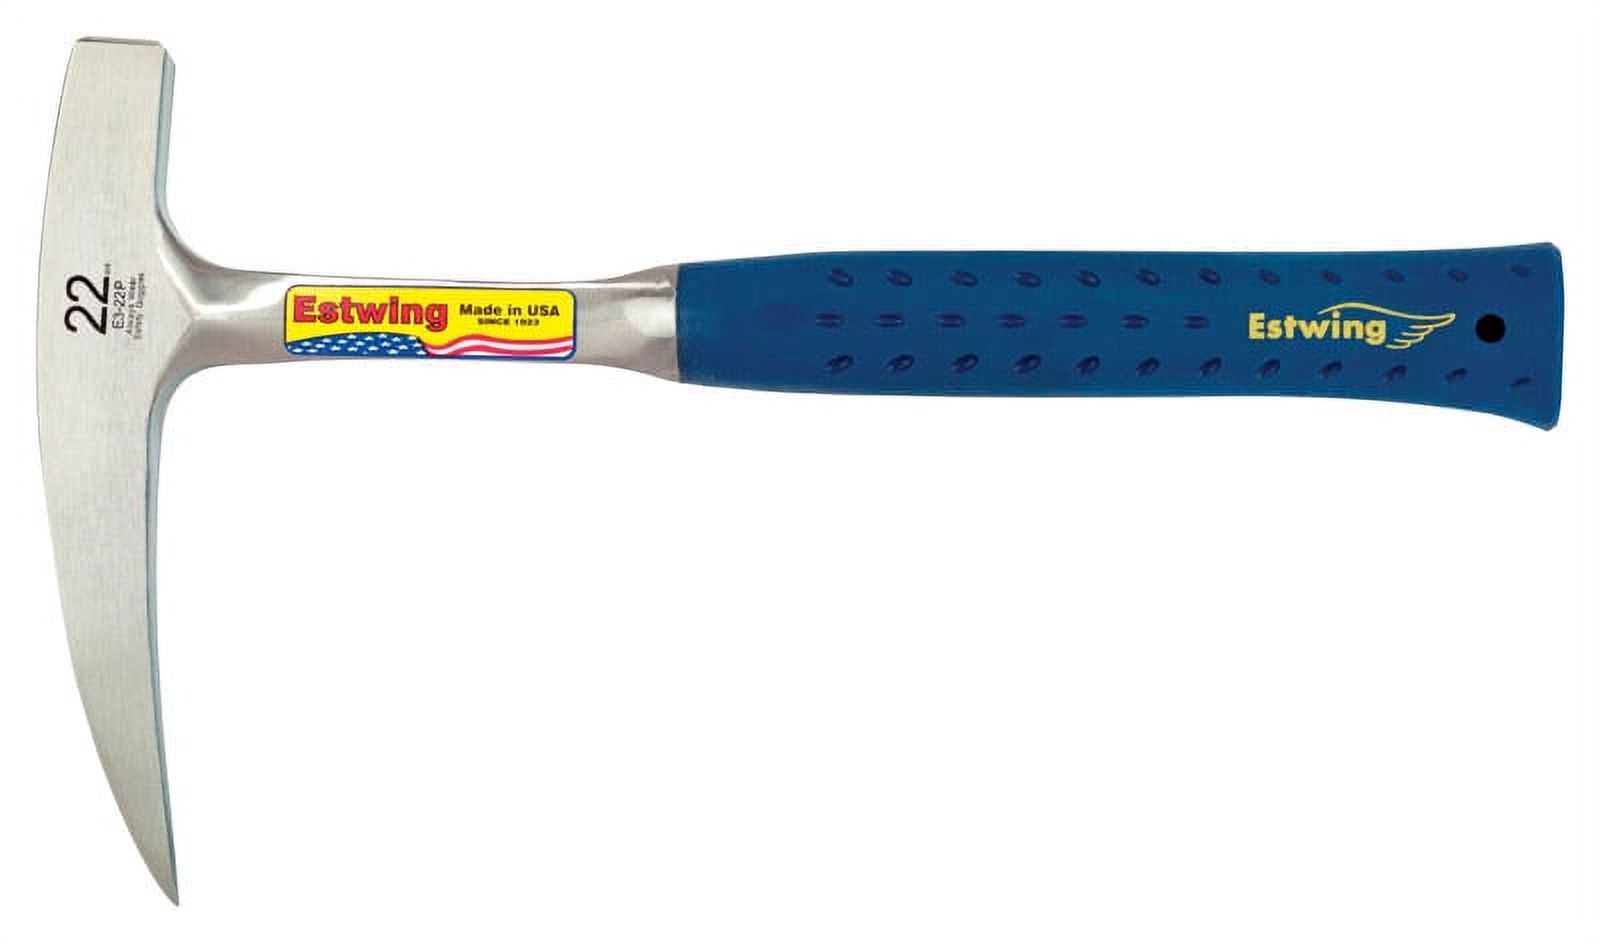 Estwing E3-22P 22-Ounce 13-Inch Rock Pick with Metal Handle - image 1 of 6